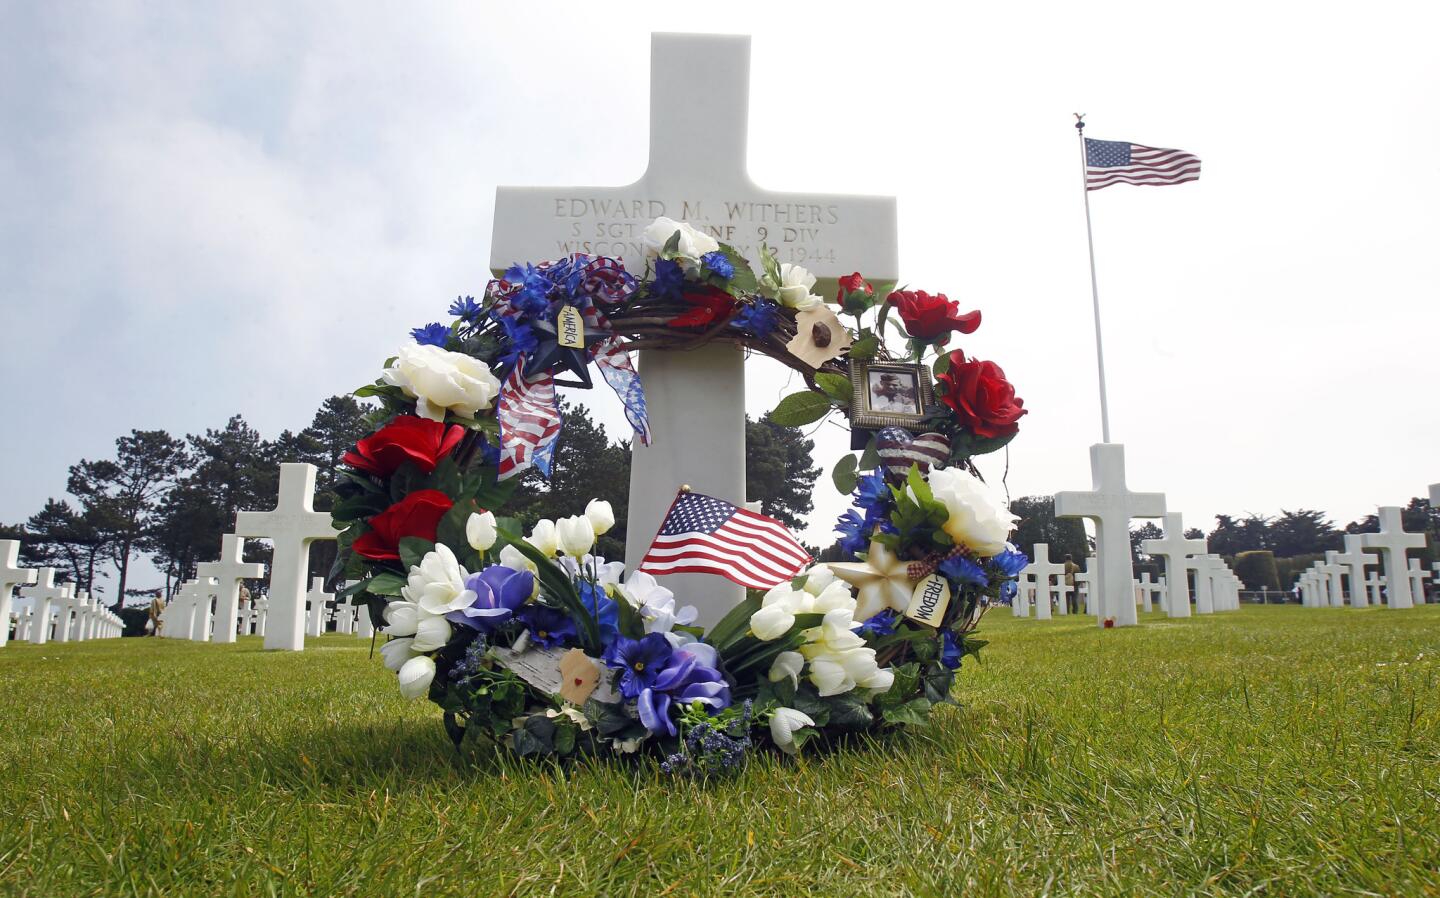 A wreath on the grave of Sgt. Edward M. Withers from Wisconsin during commemorations of the 69th anniversary of the D-day landings, at the Colleville American military cemetery, in Colleville sur Mer, France.